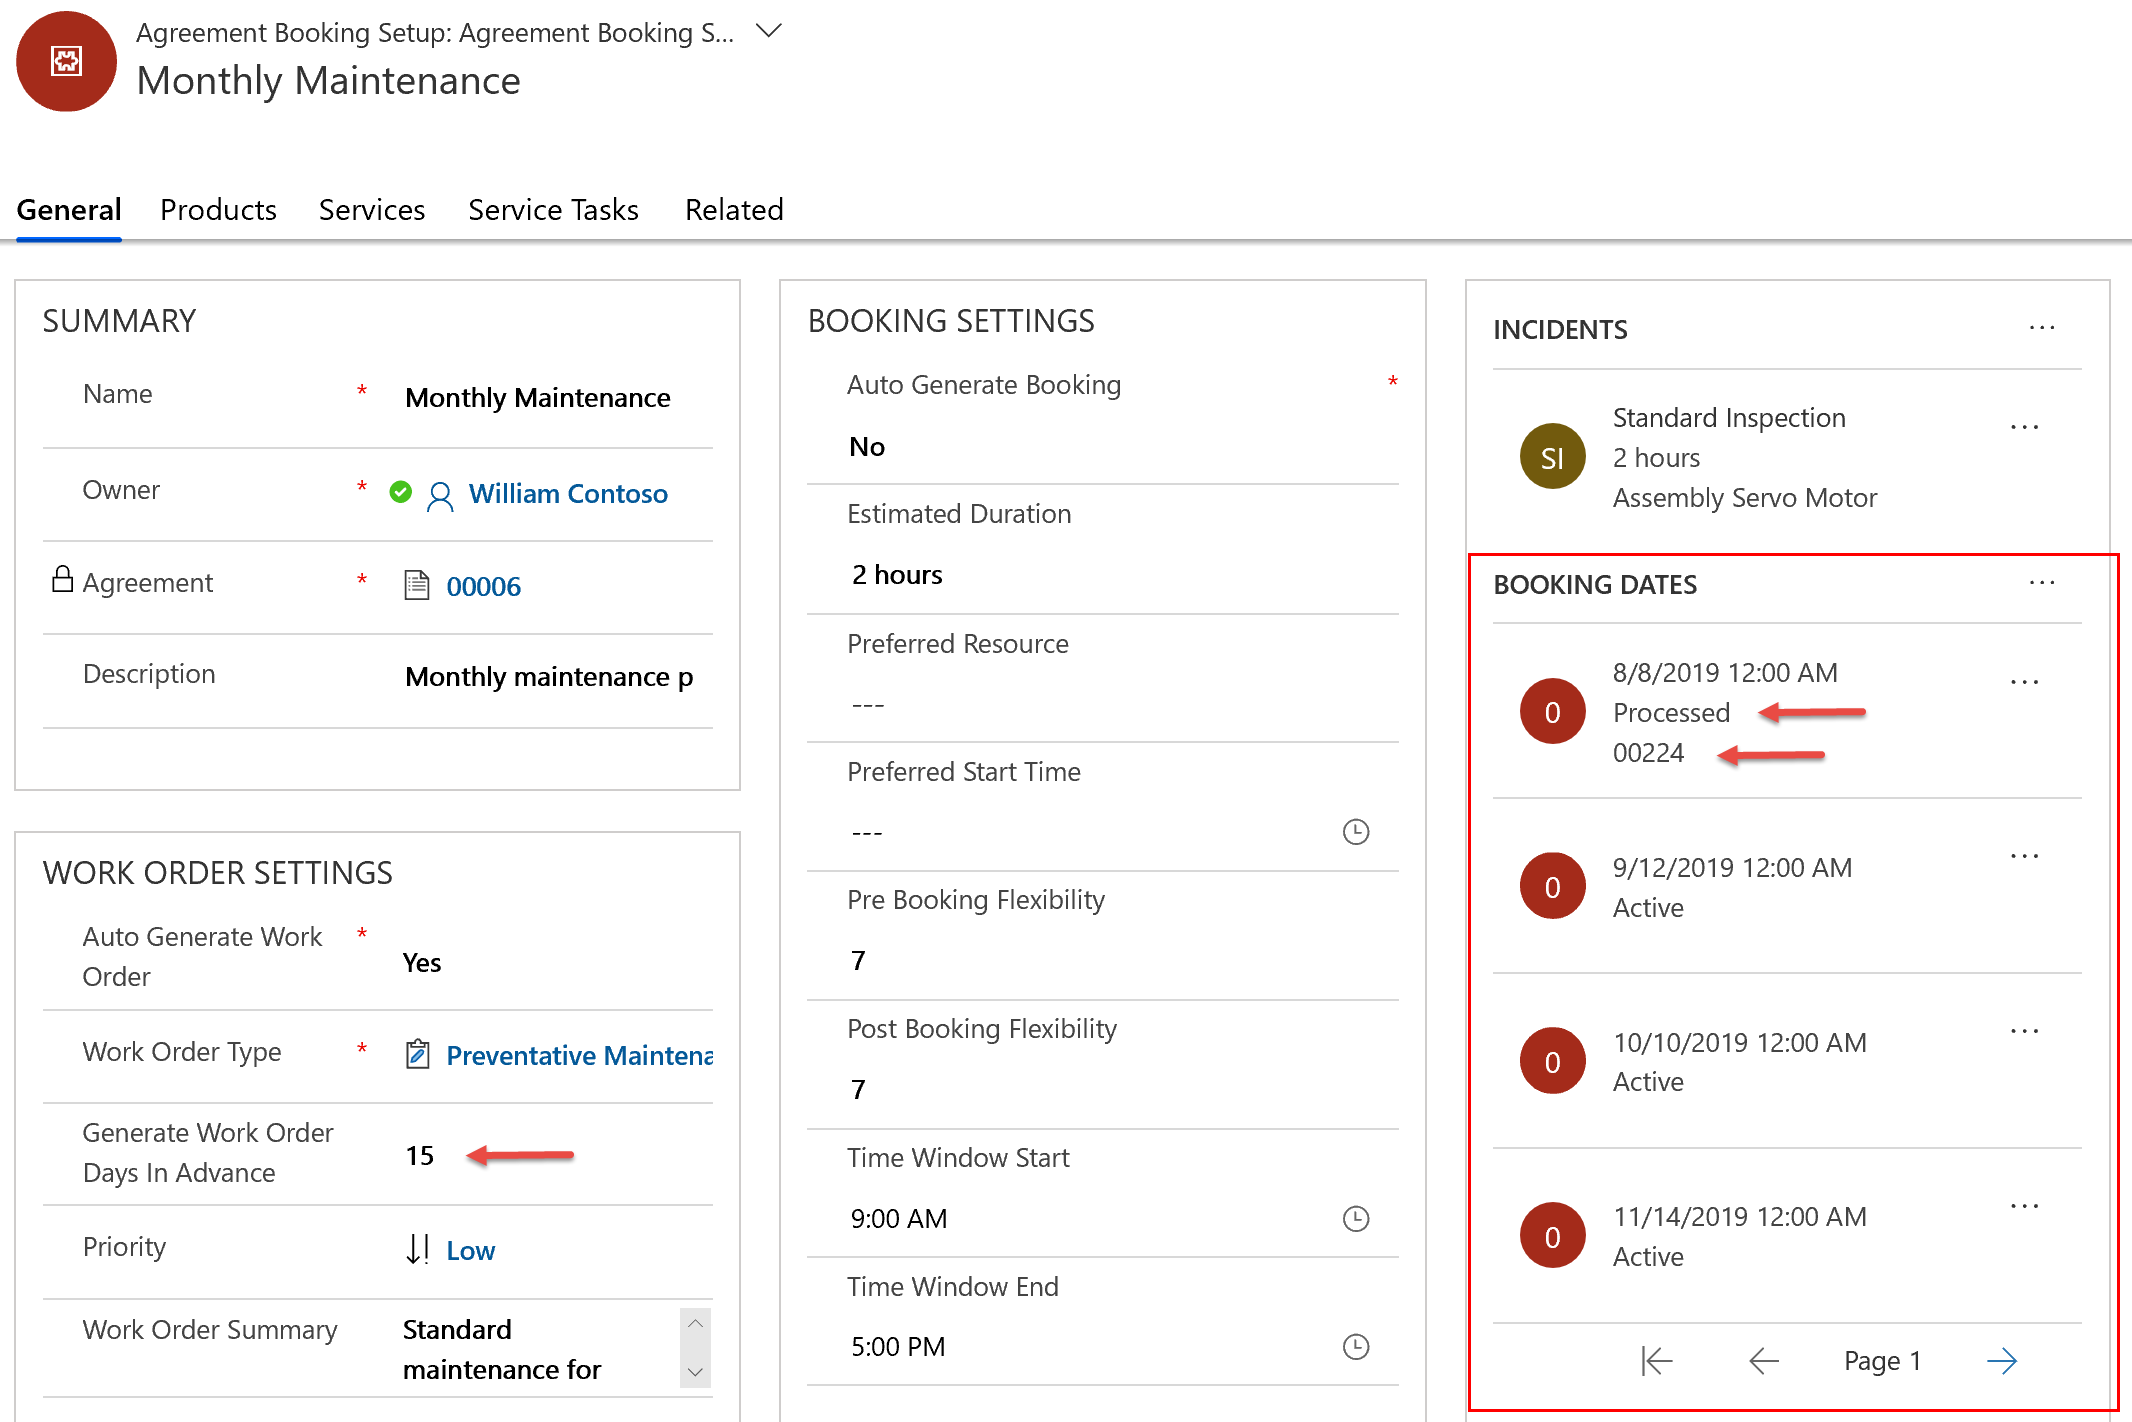 Screenshot of the agreement booking setup, showing the processed booking dates.